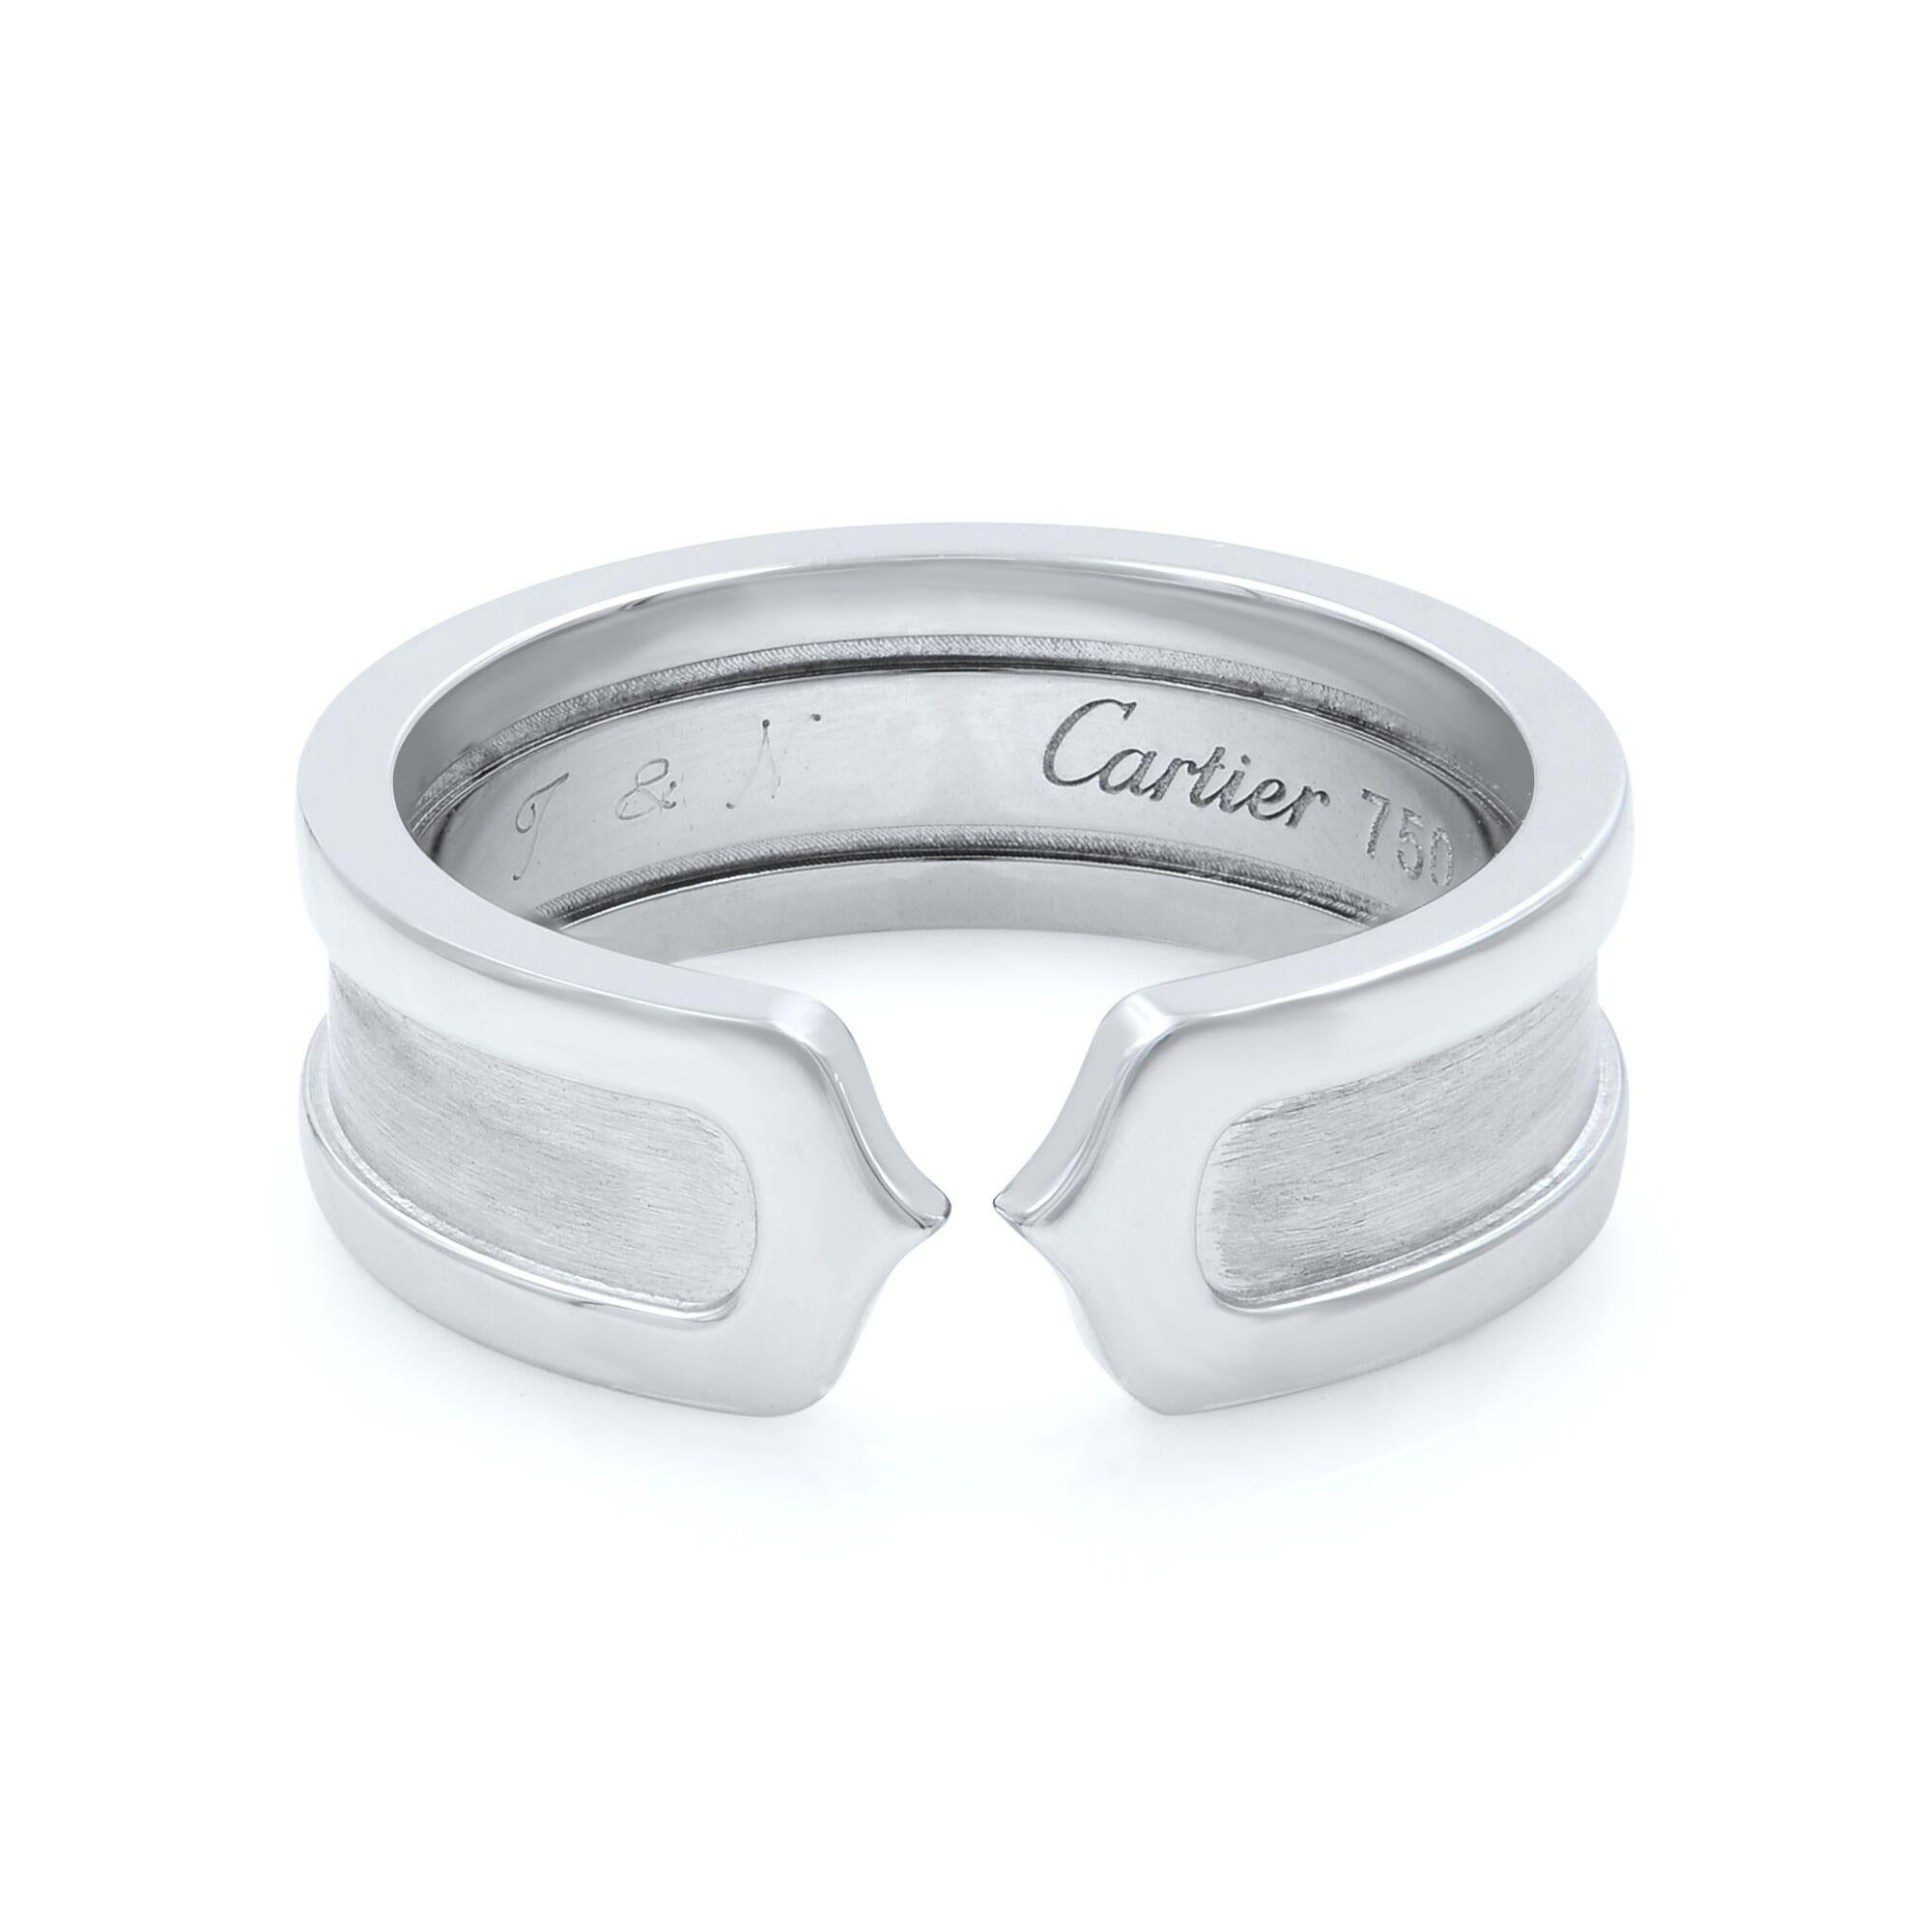 Cartier is known for making jewelry in a way that glorifies art and craftsmanship. This C De Cartier carries the same wondrous trait. It has been meticulously crafted with 18k white gold and designed with a high polish finish throughout. The ring is